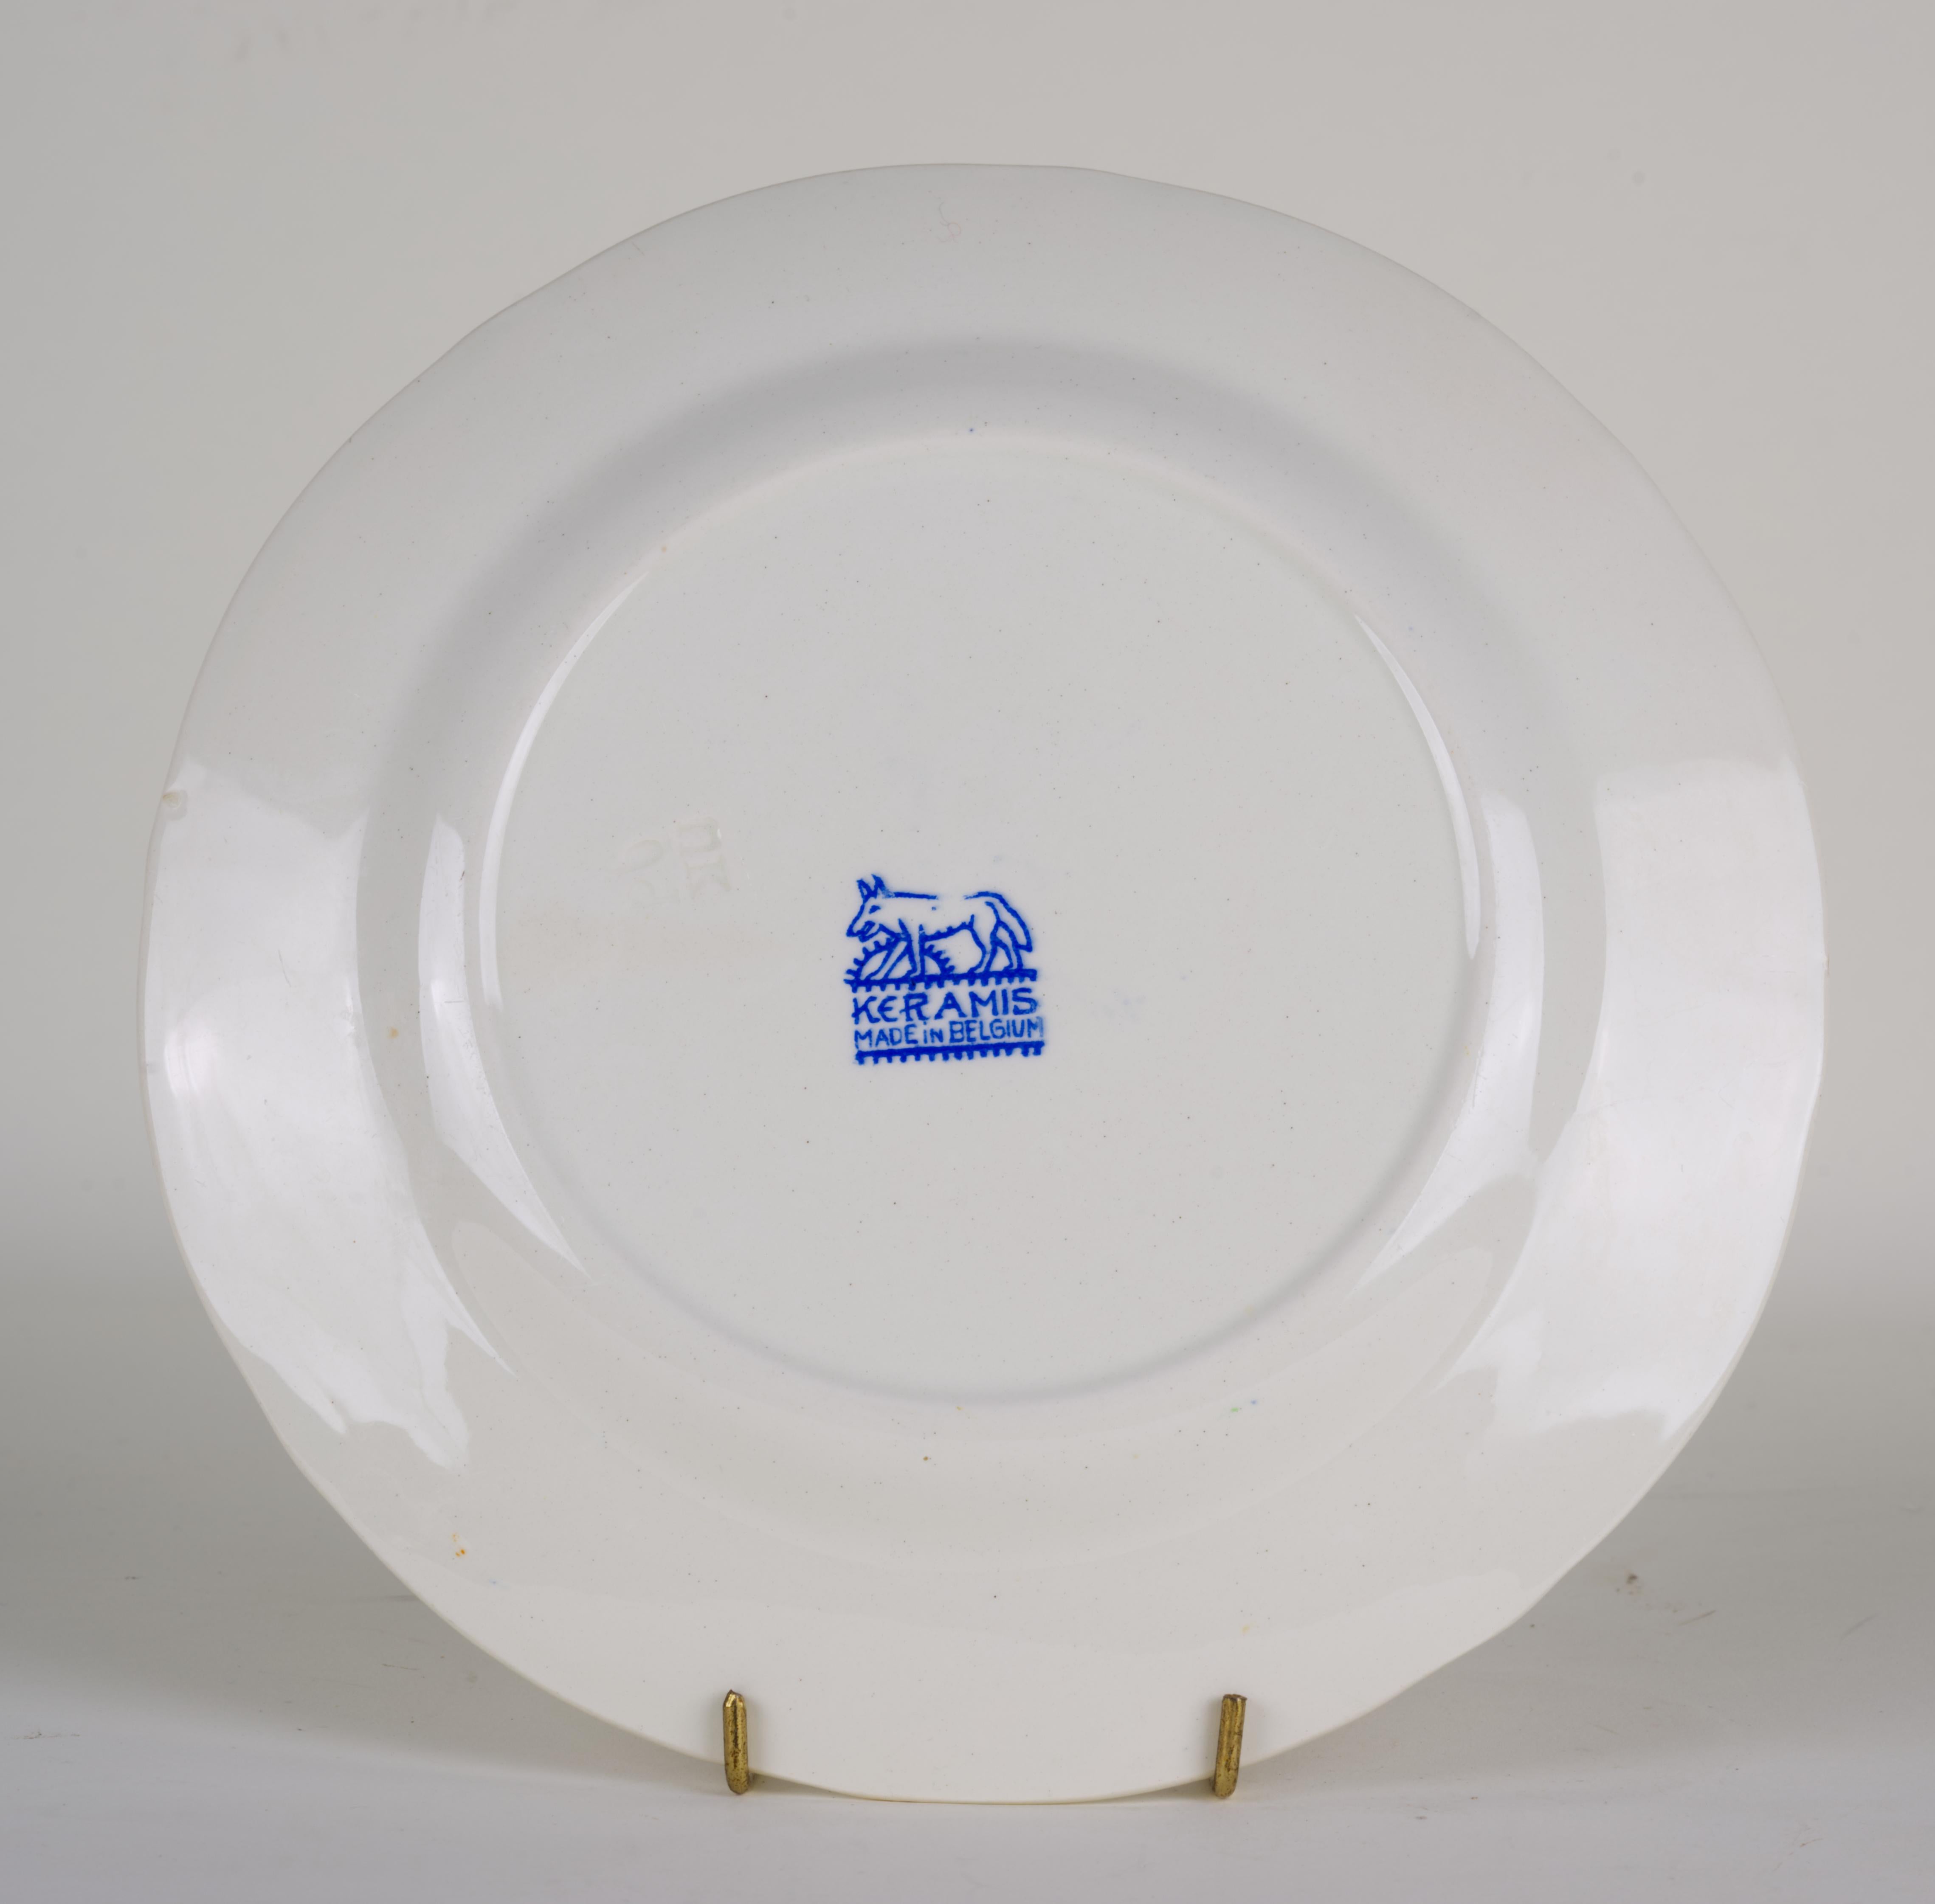 Charles Catteau for Boch Freres Keramis, Set of 4 Faience salad Plates, Art Deco In Good Condition For Sale In Clifton Springs, NY